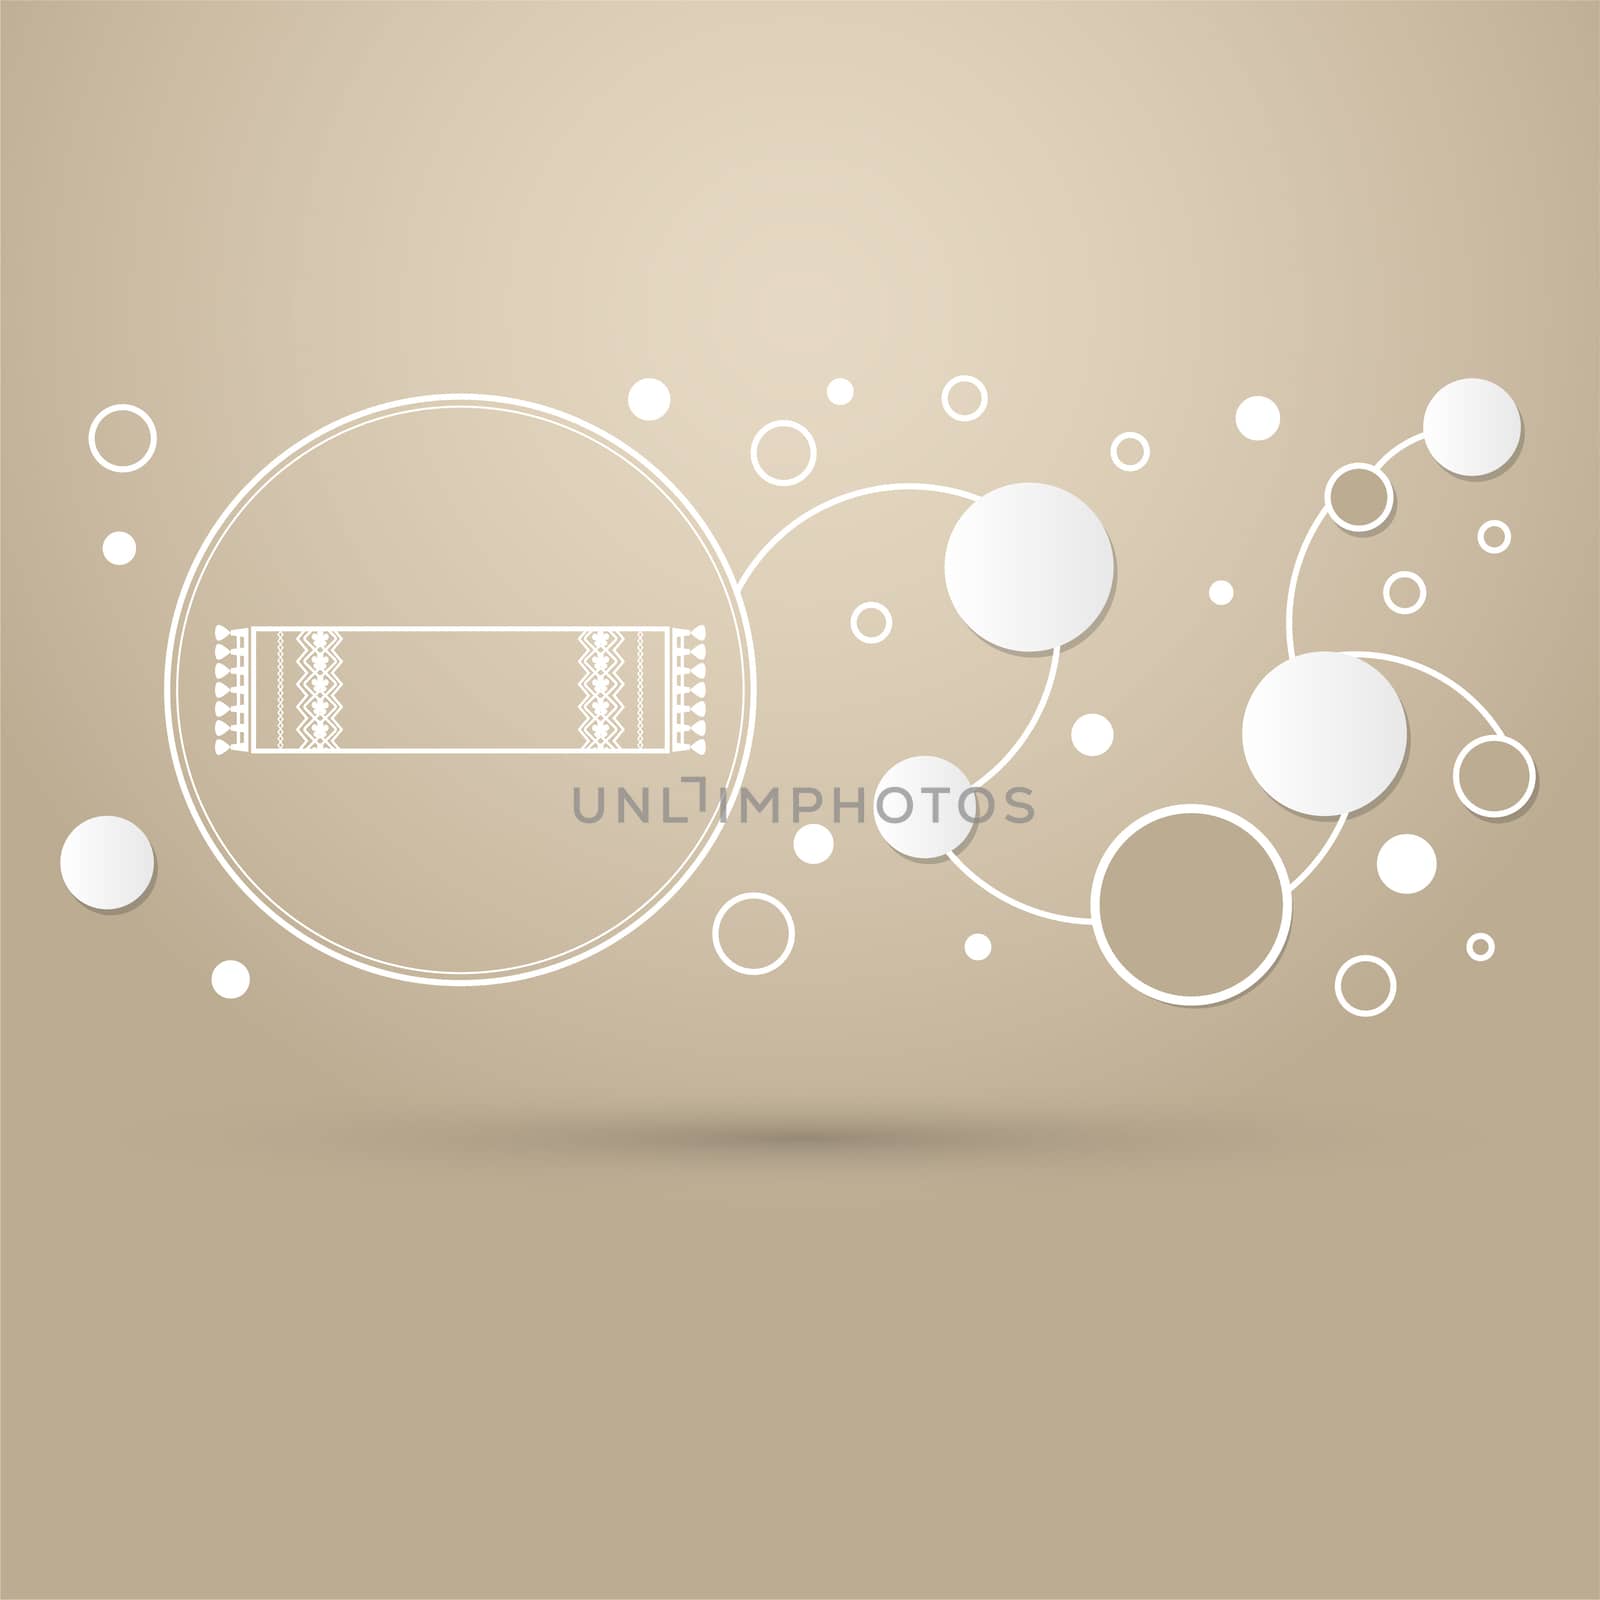 scarf icon on a brown background with elegant style and modern design infographic.  by Adamchuk